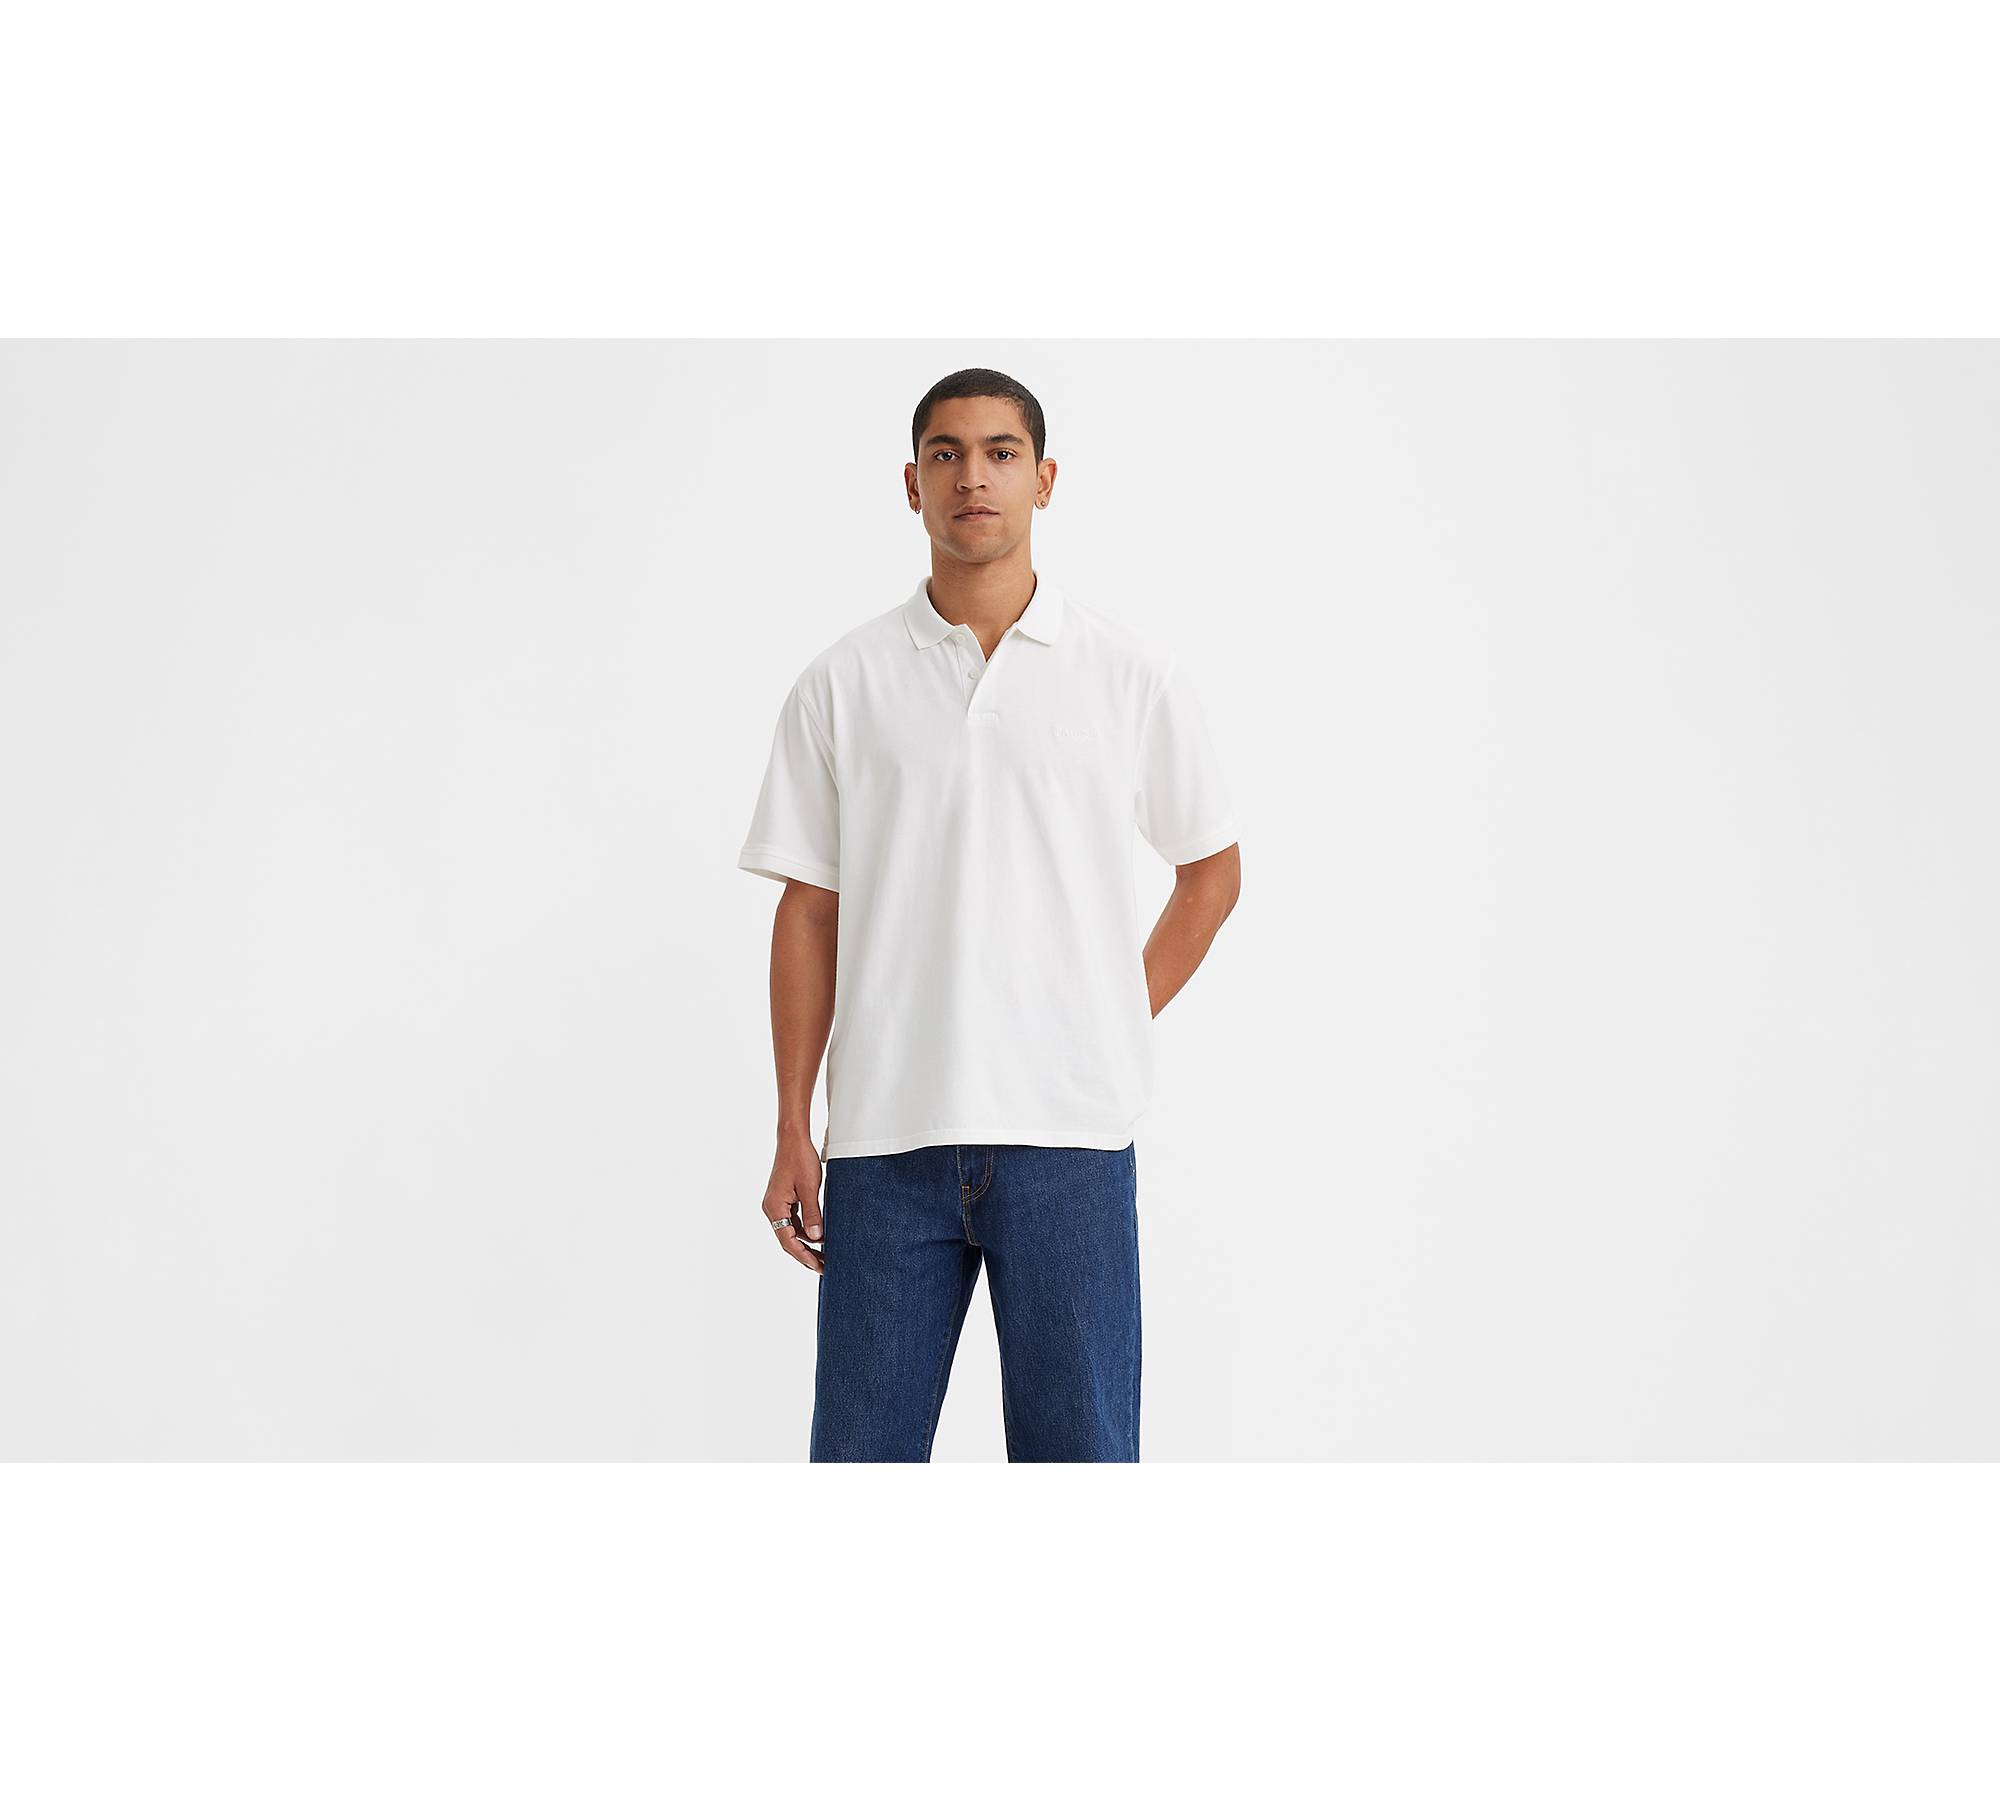 Polo Shirts for Men 0 Short Sleeve Tops White Xl 